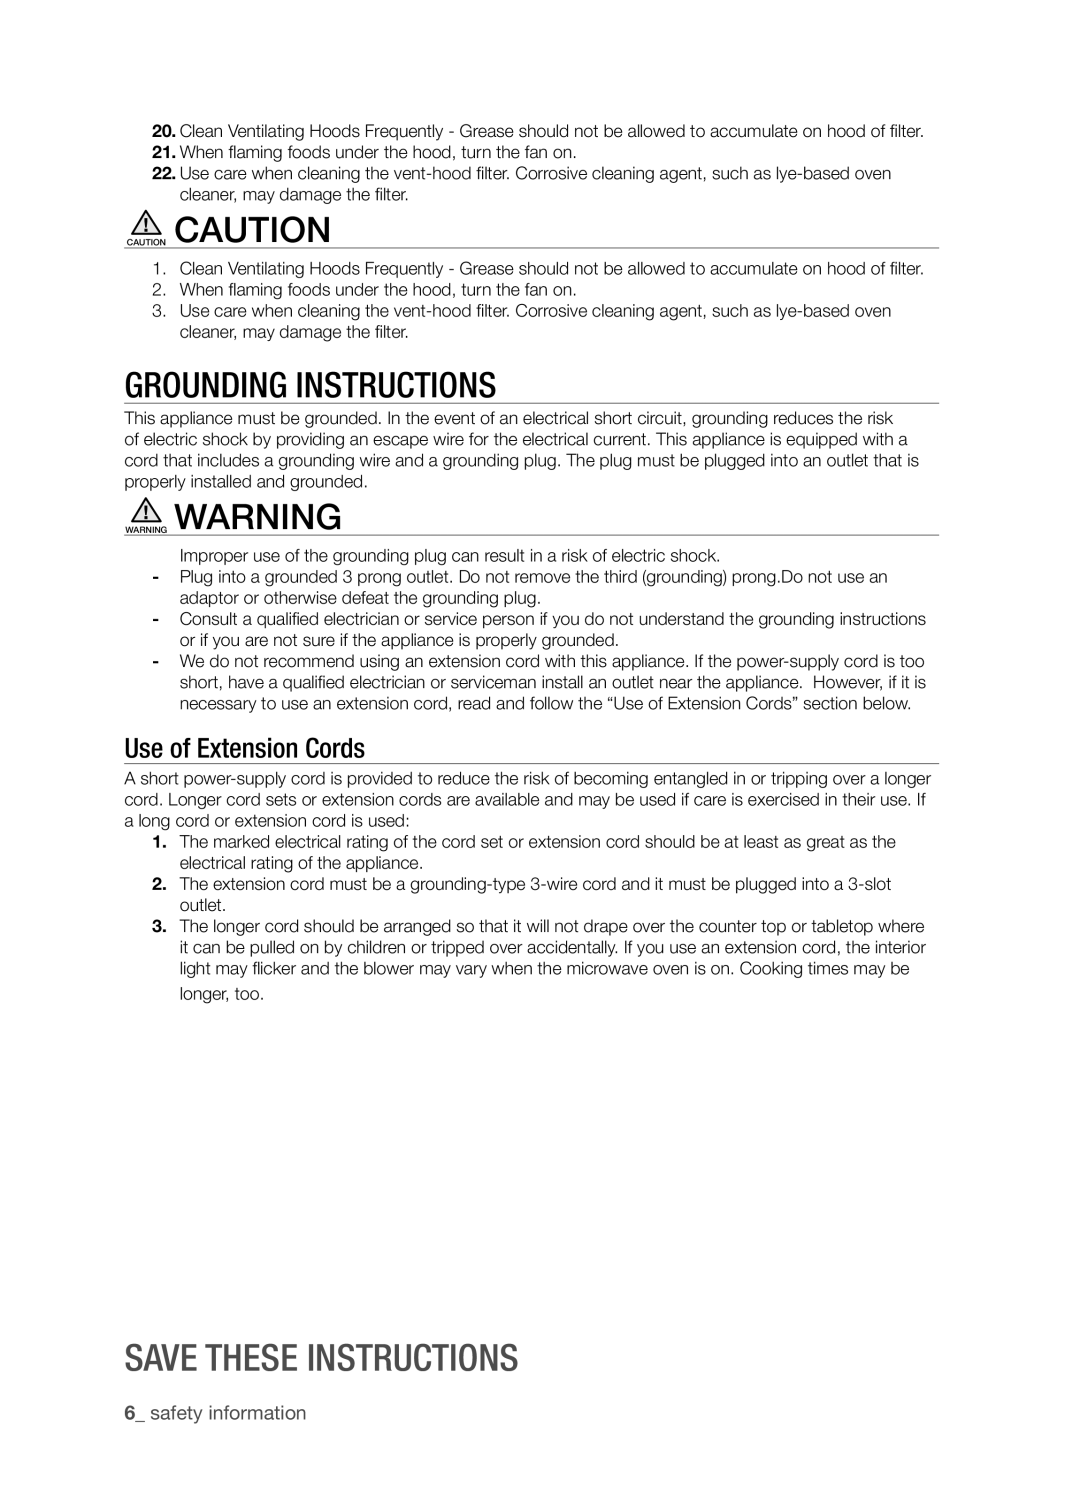 Samsung SMH9151 user manual Grounding Instructions, Save these instructions, Use of Extension Cords, safety information 